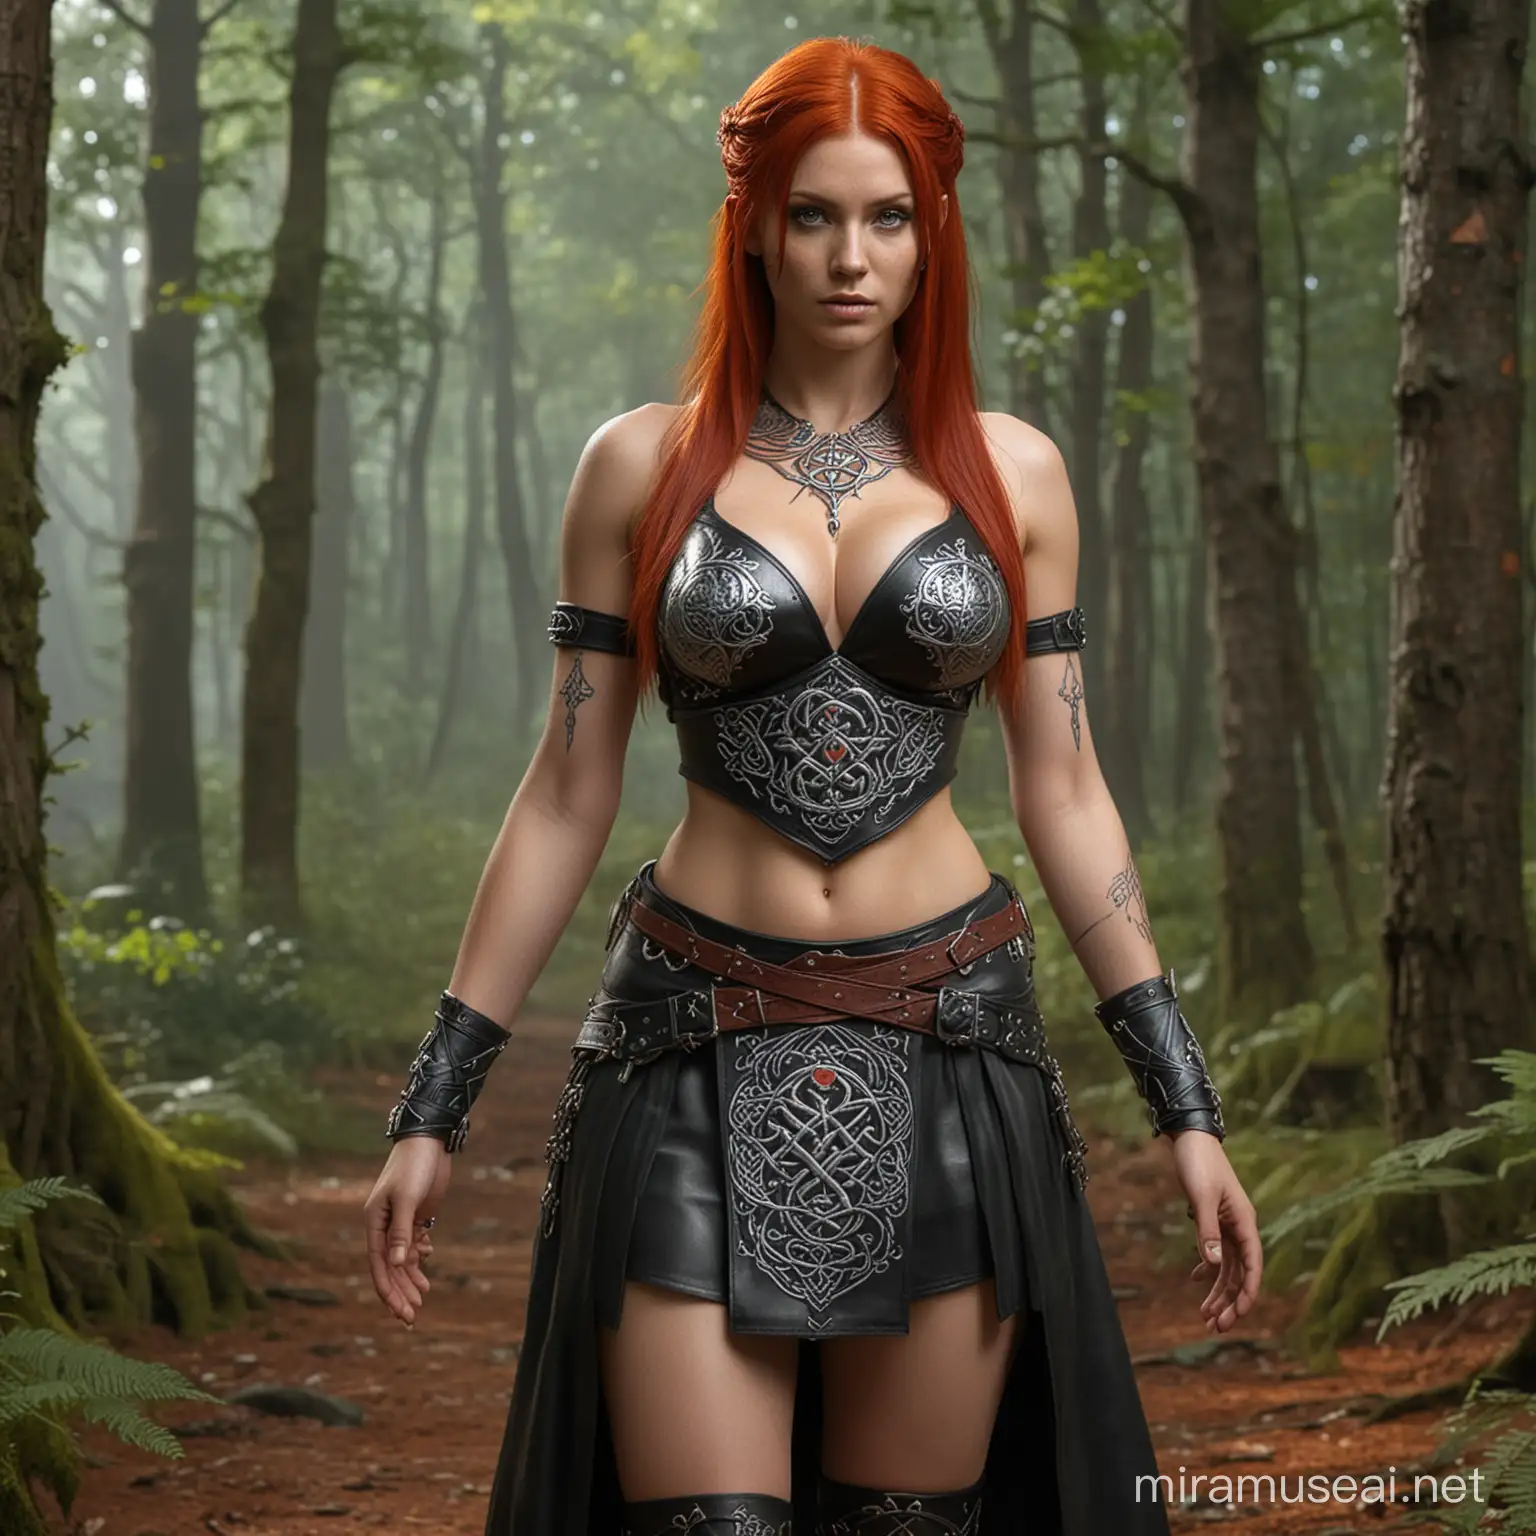 Fiery RedHaired Female Warrior in Enchanted Forest